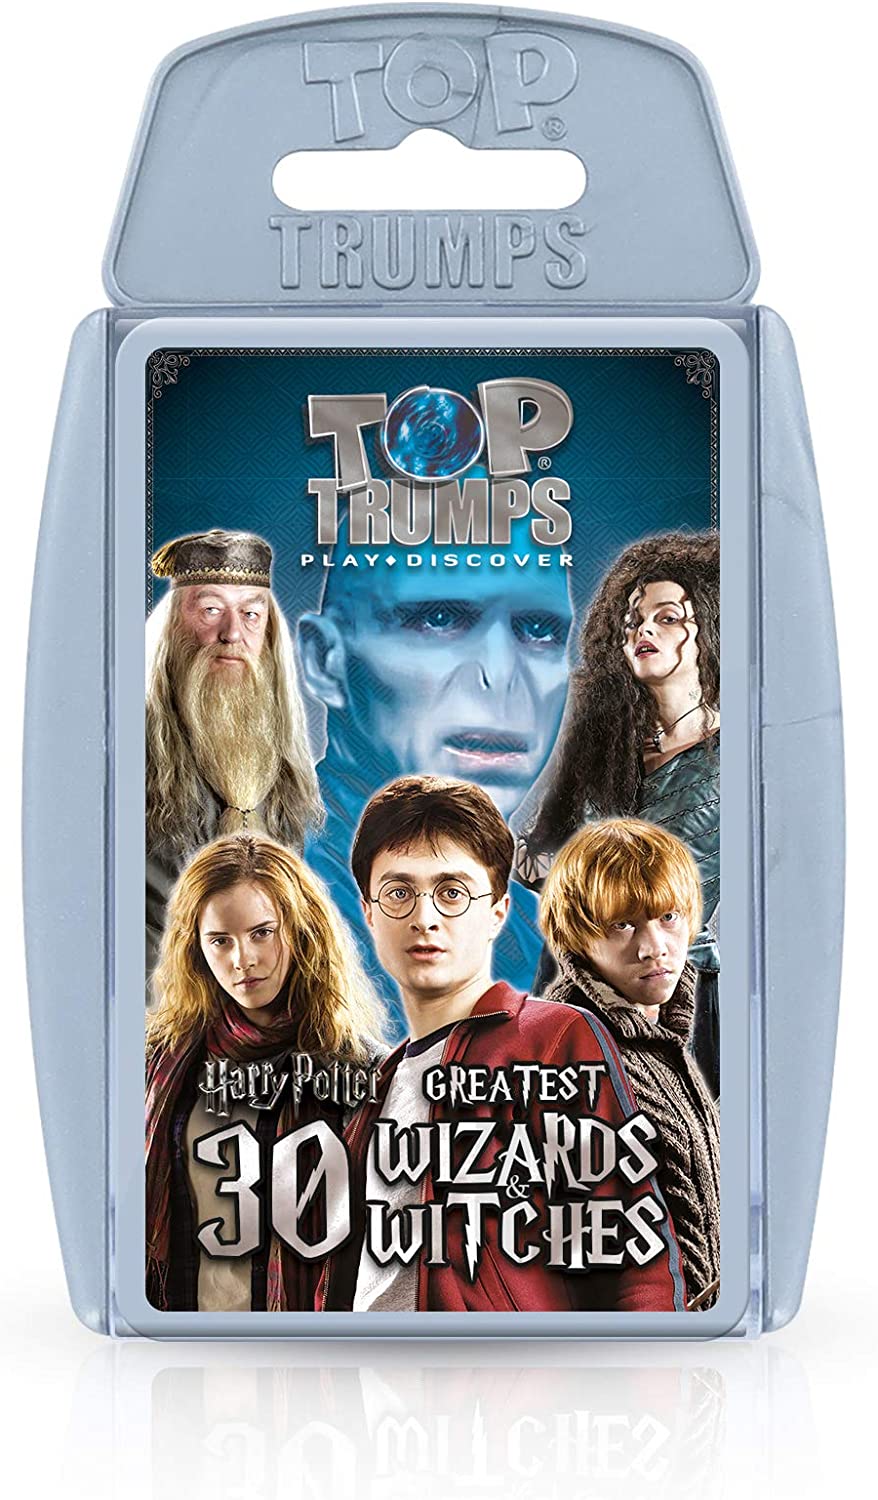 Top Trumps: Harry Potter, Wizards &amp; Witches